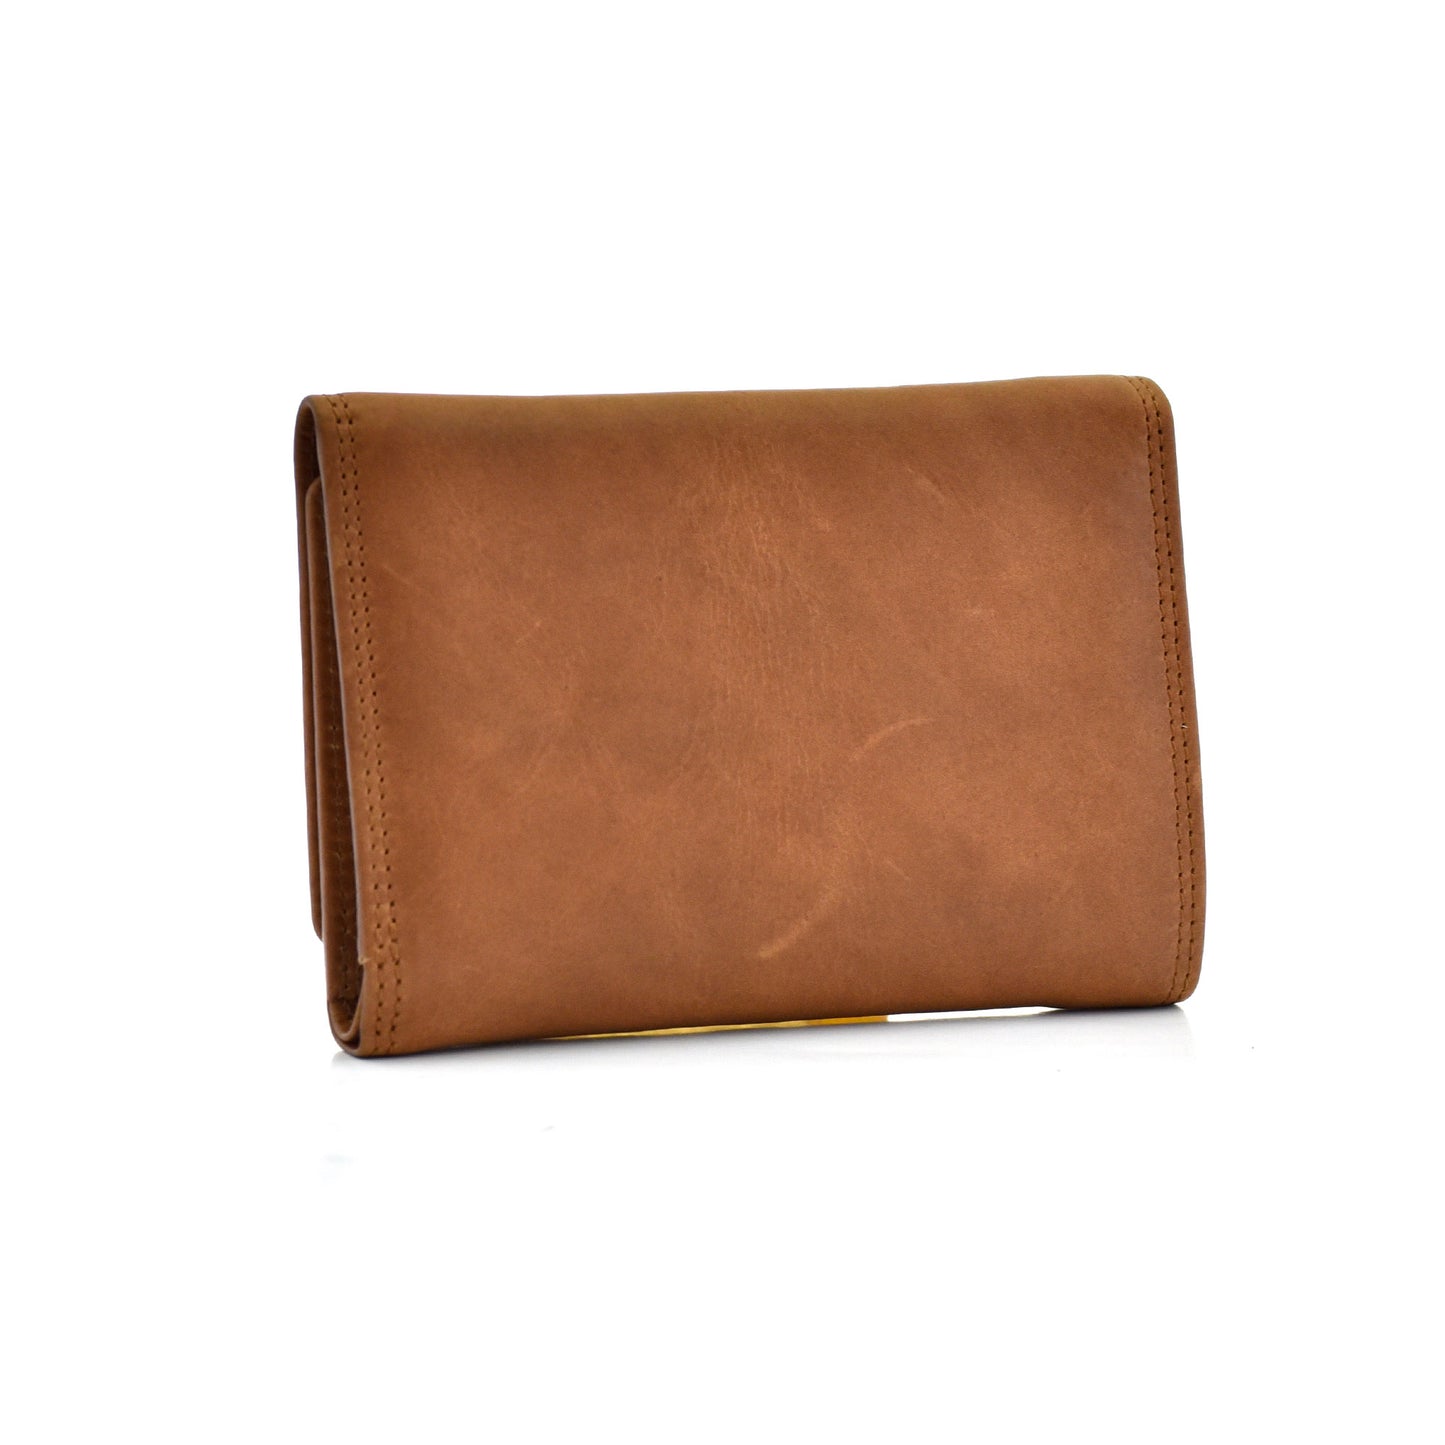 Style n Craft 300799-CG Ladies Trifold Leather Wallet with Snap Button Closure - Cognac Color - Back View Closed